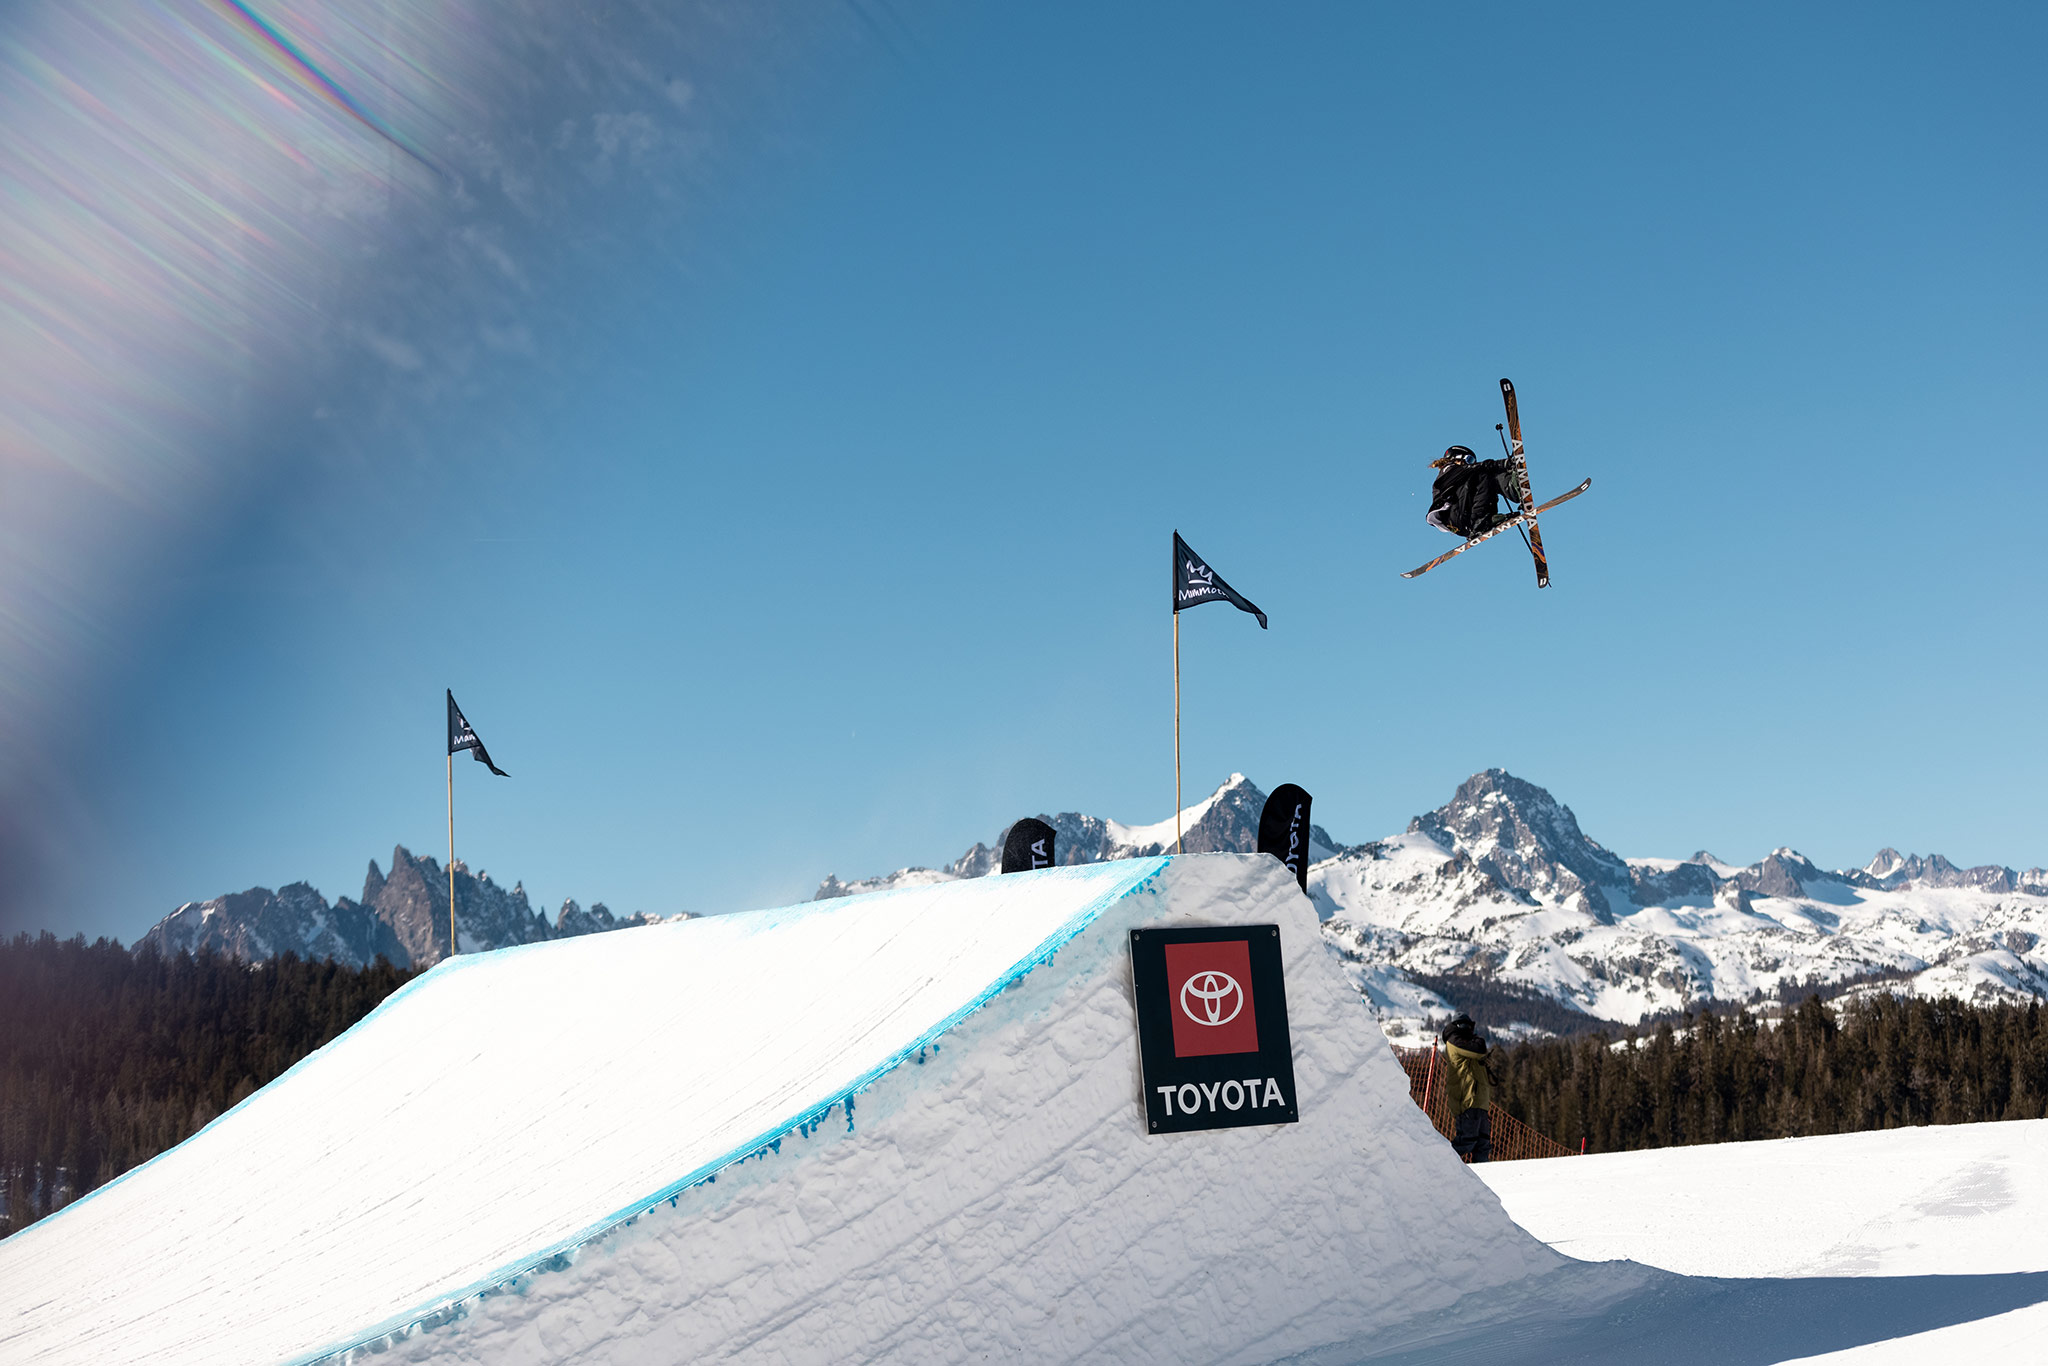 Olivia Asselin at the 2022 US Grand Prix Slopestyle in Mammoth Mountain, California